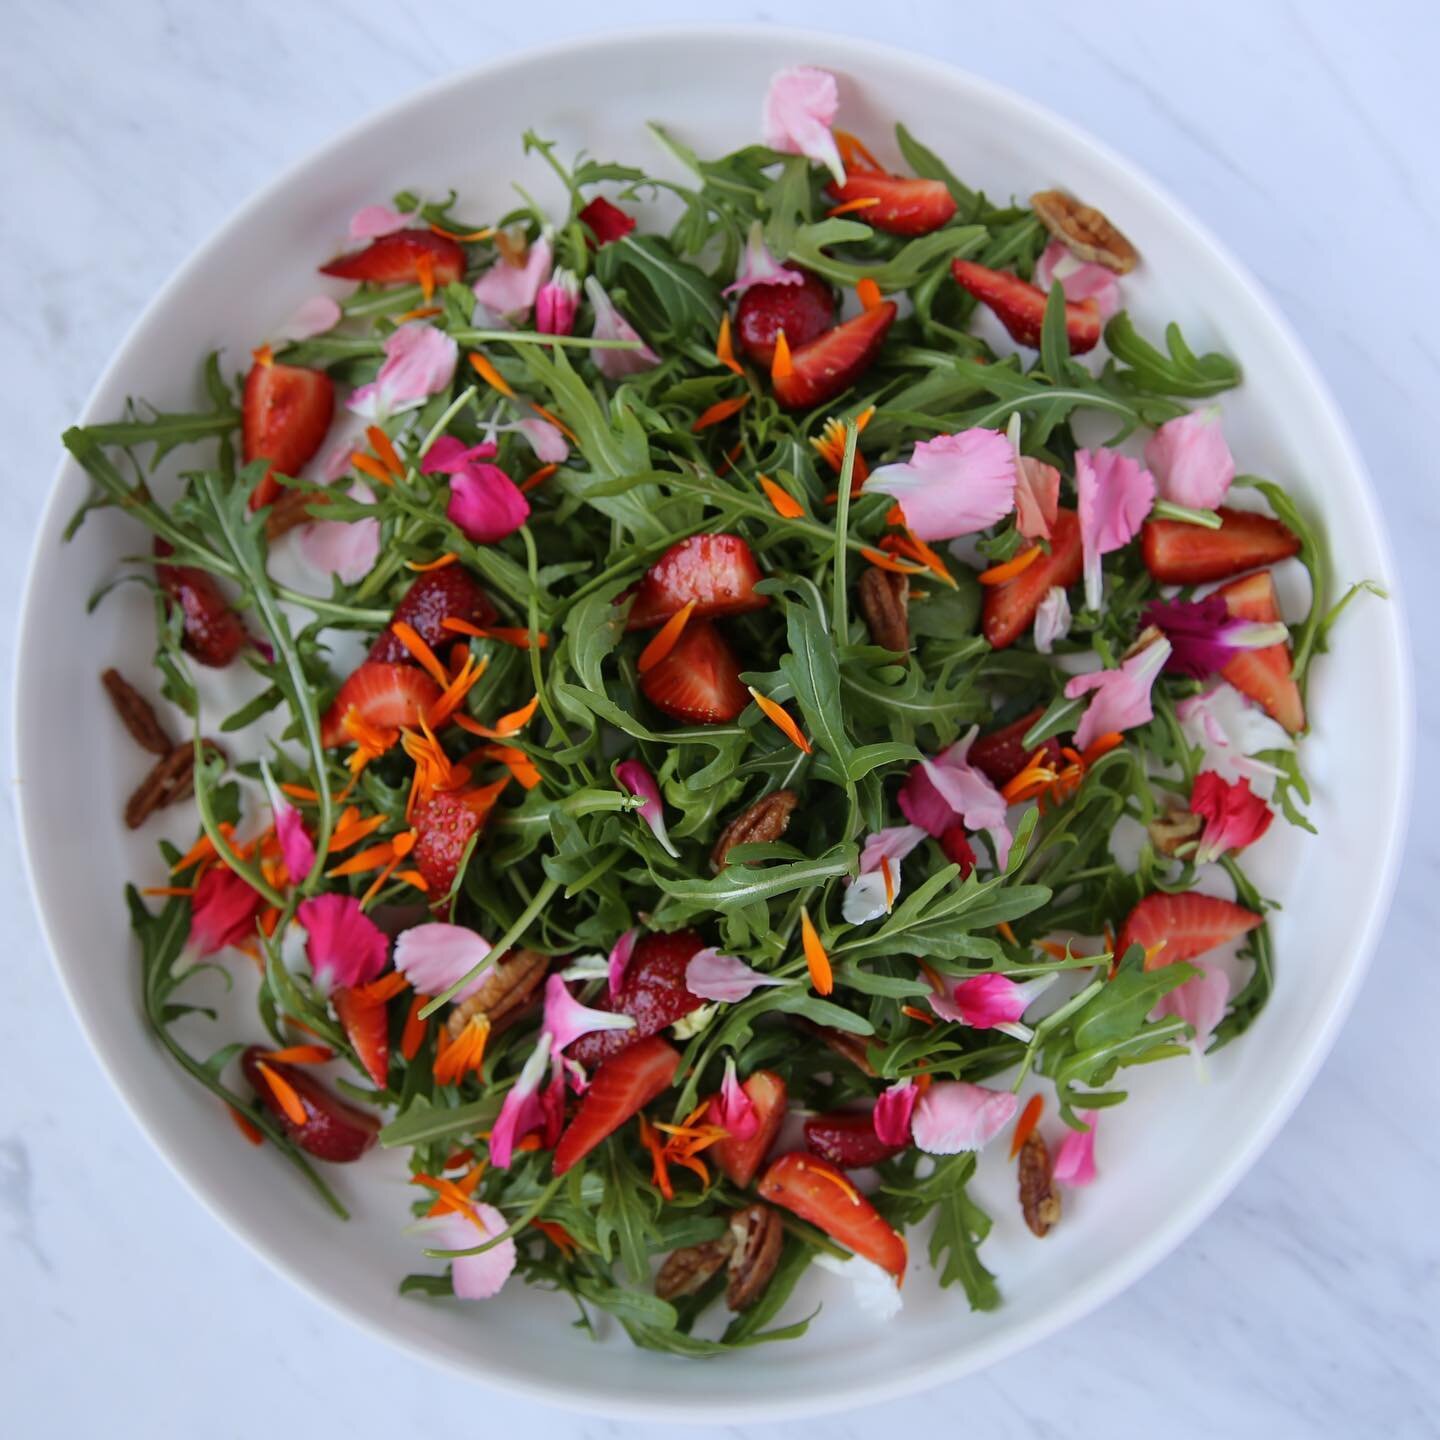 Rocket Strawberries and Toasted Pecan Salad 🚀💗 double tap for recipe 💗 macerated strawberries in balsamic and maple syrup. Toasted pecan nuts. Rocket leaves and edible flowers from veggie garden 💗 dressing a little mustard, garlic and lots of oli